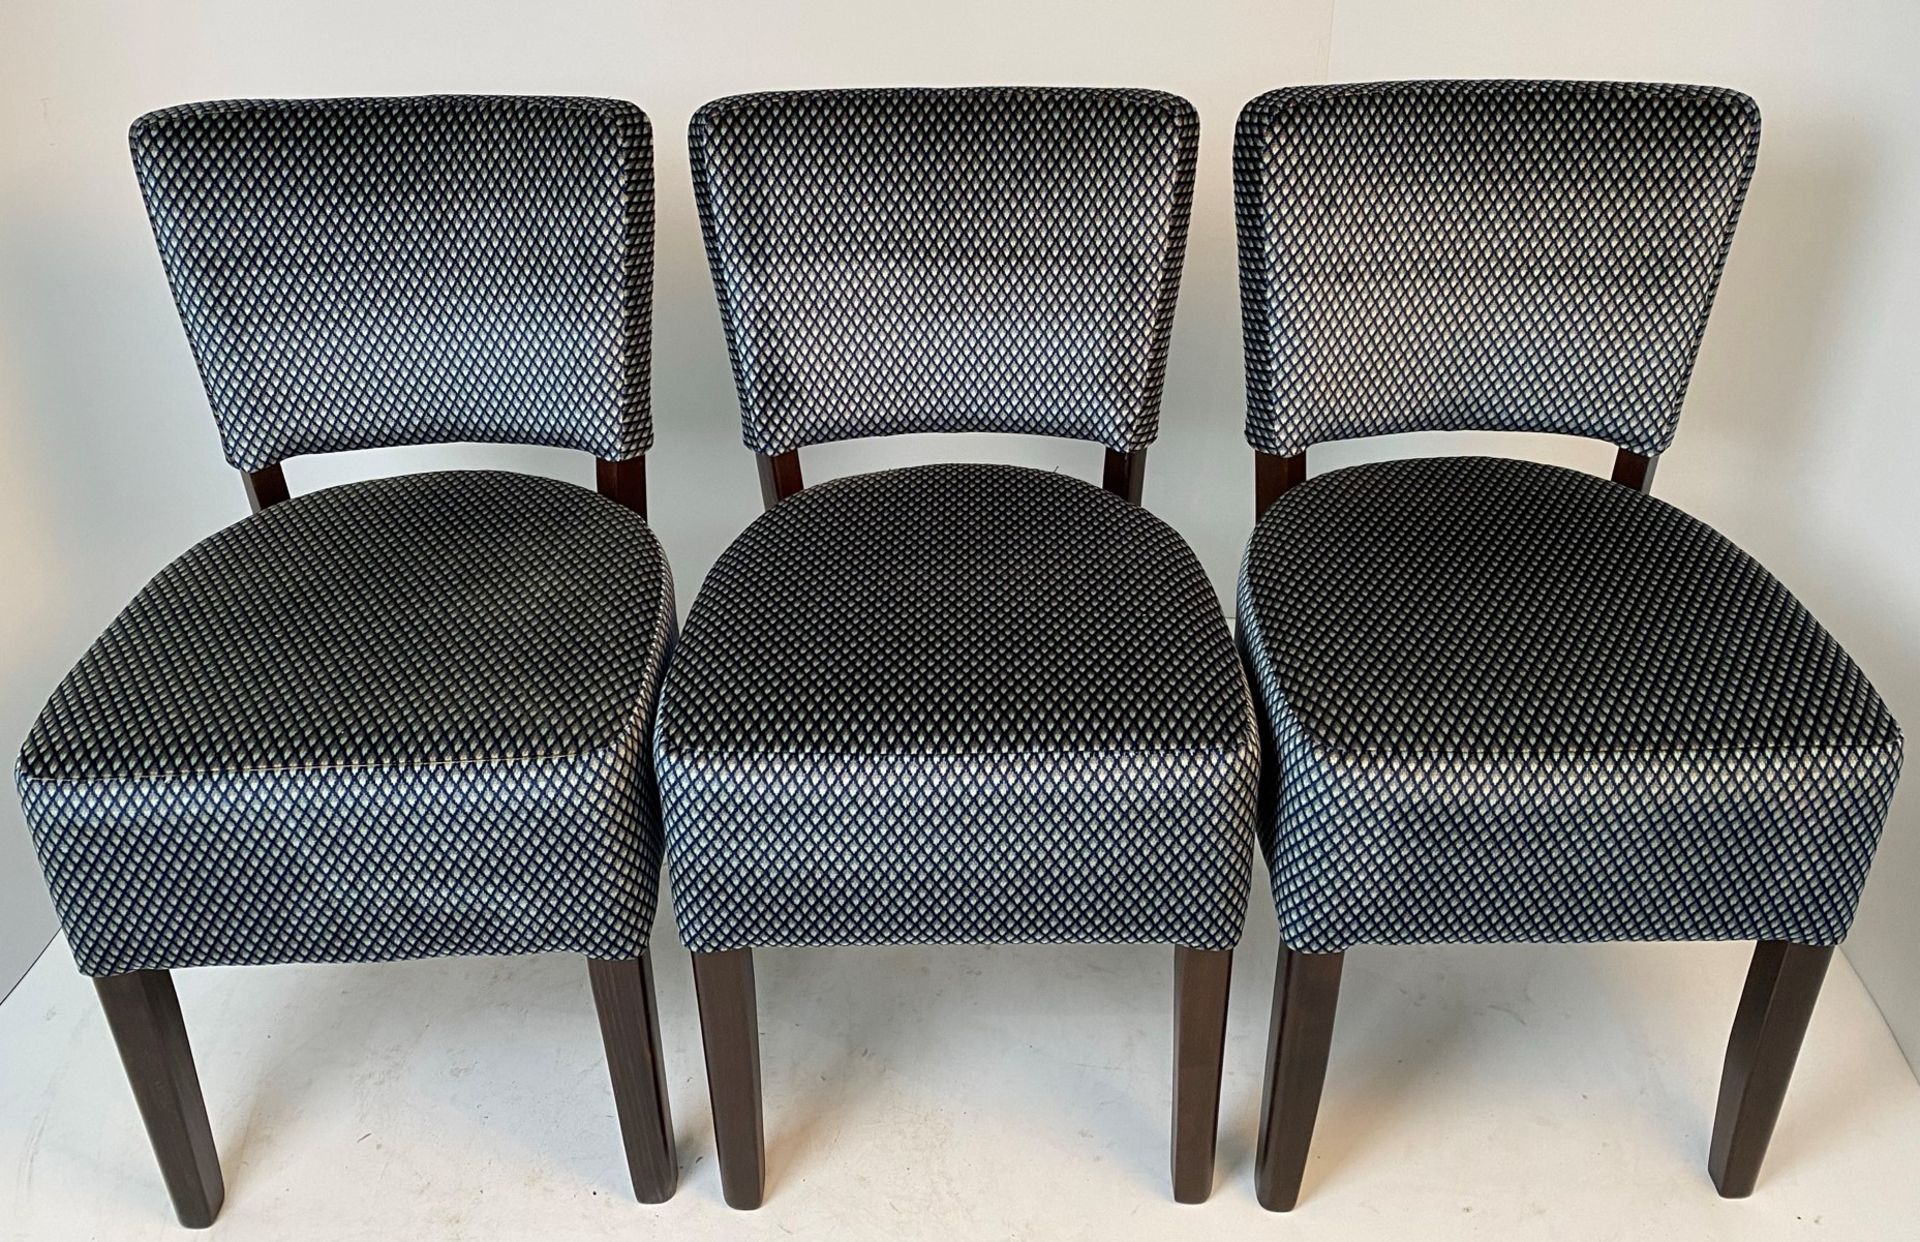 3 x Memphis Carnoustie Navy side/dining chairs with walnut coloured frames